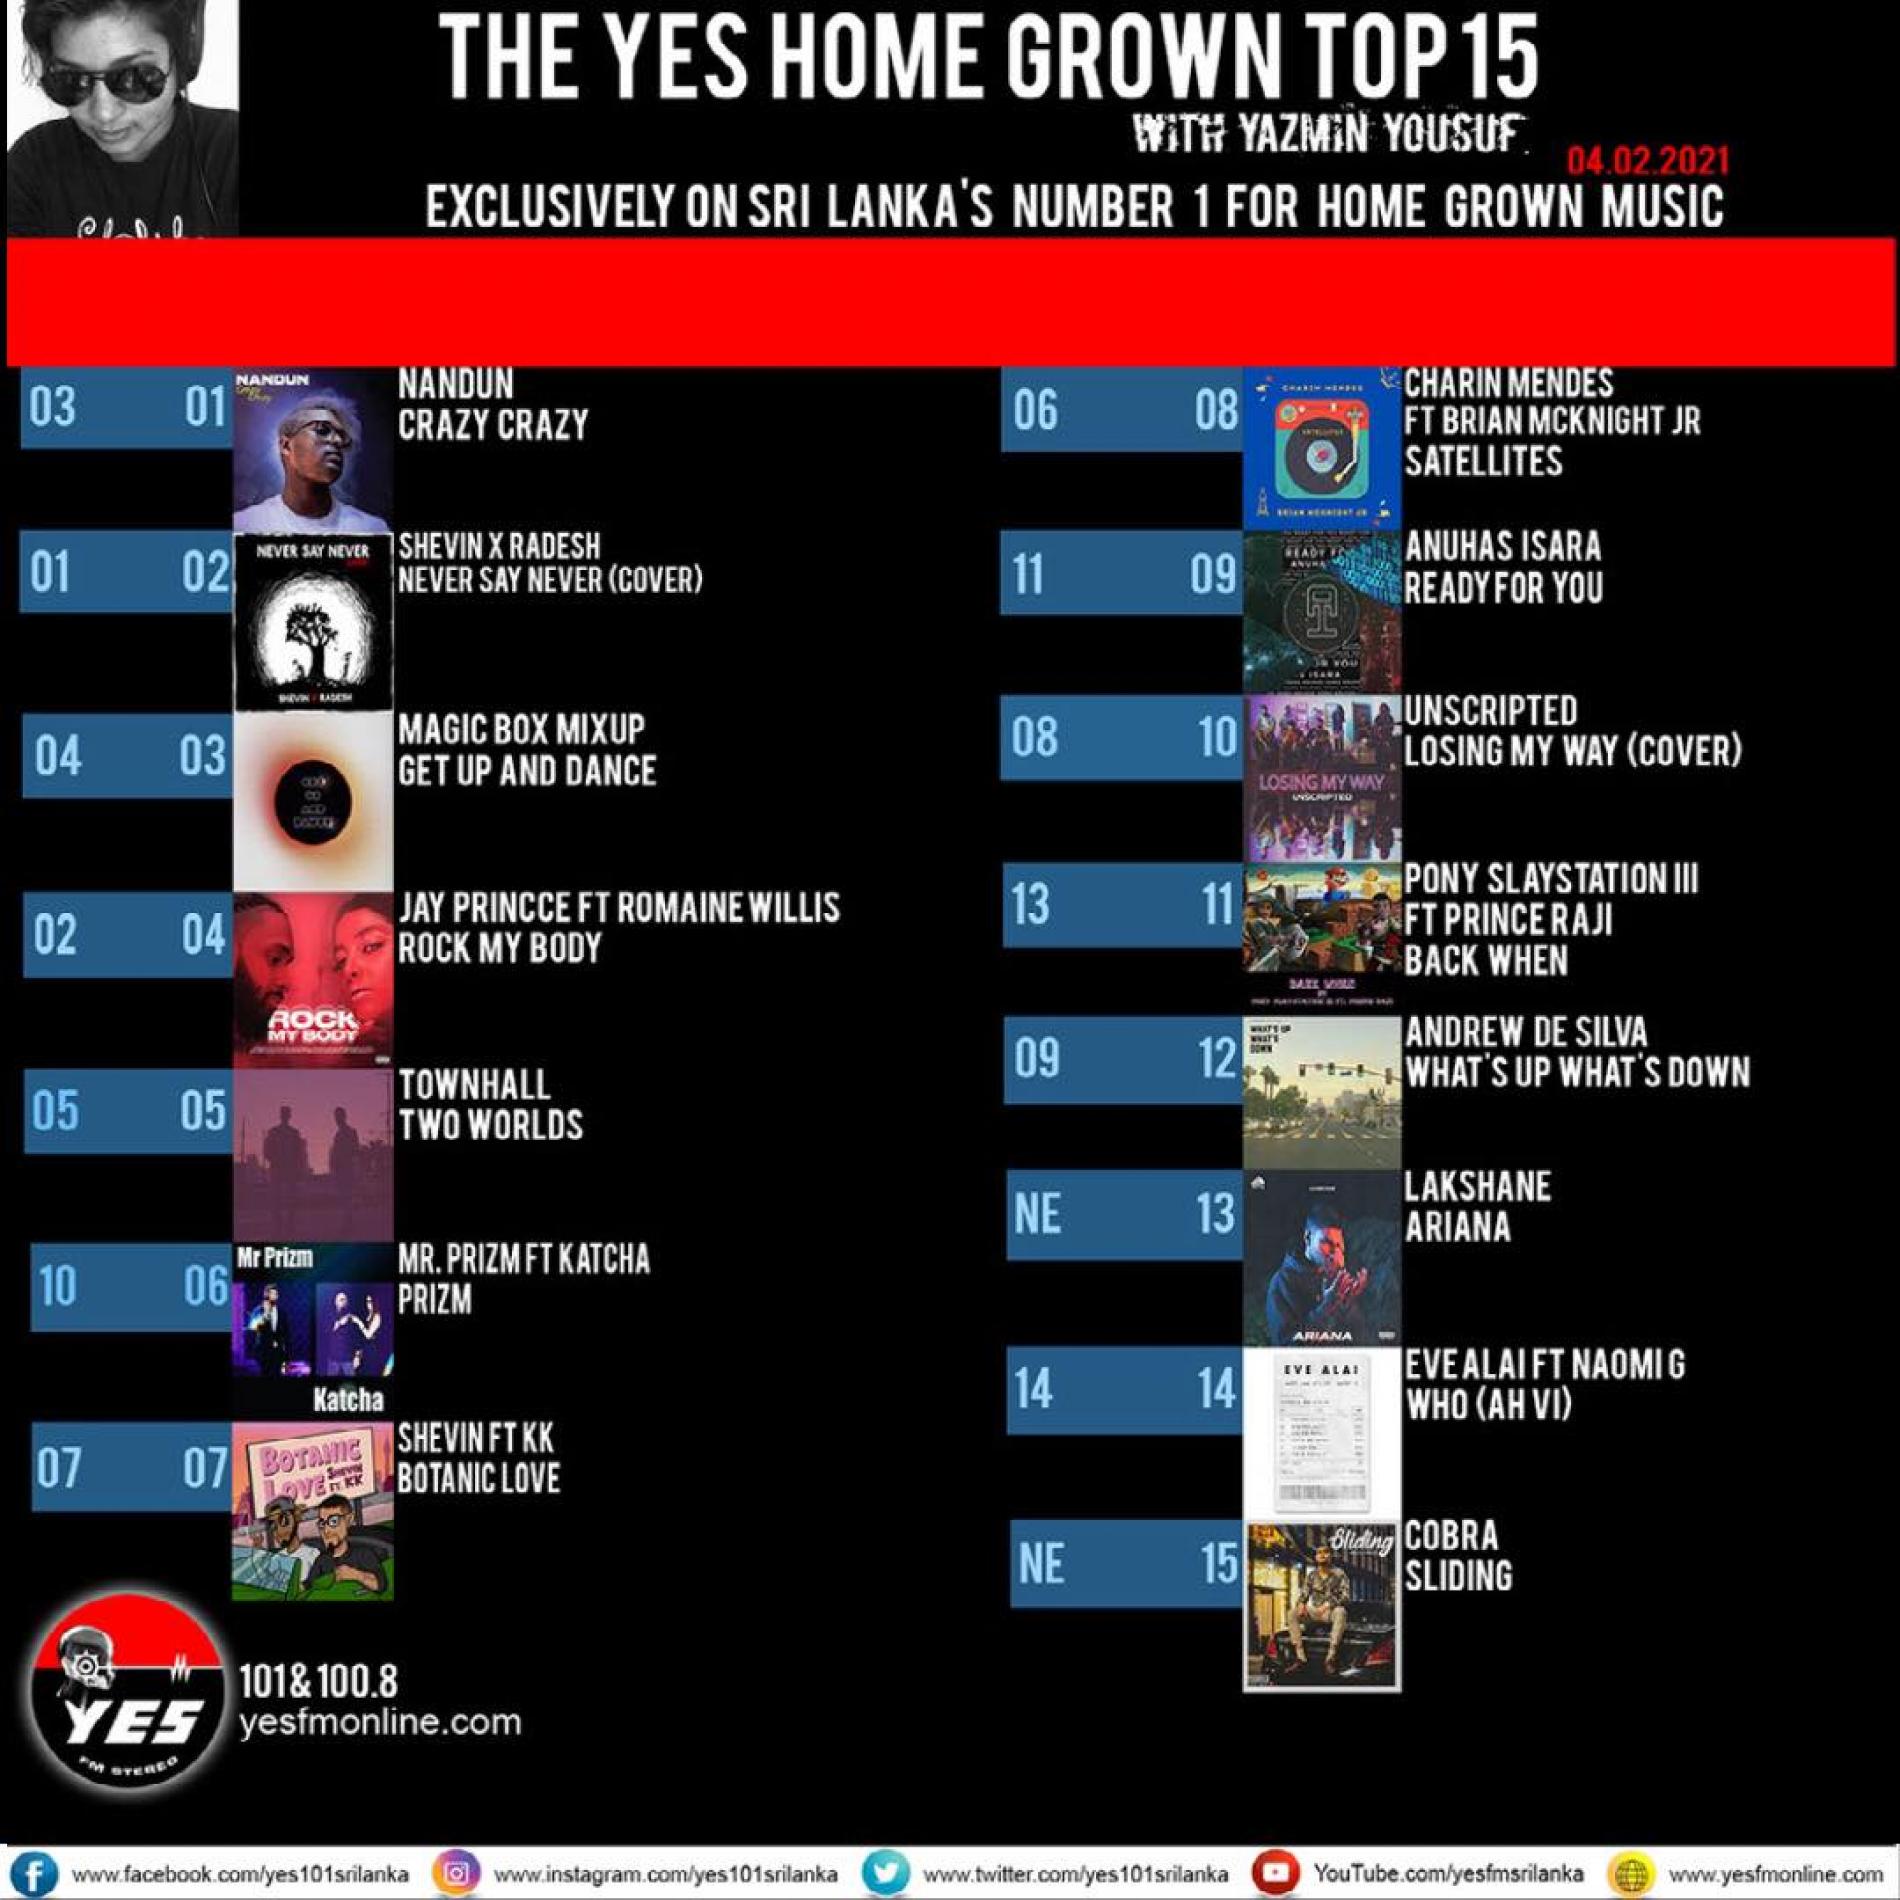 News : Nandun Hits Number 1 On The YES Home Grown Top 15!